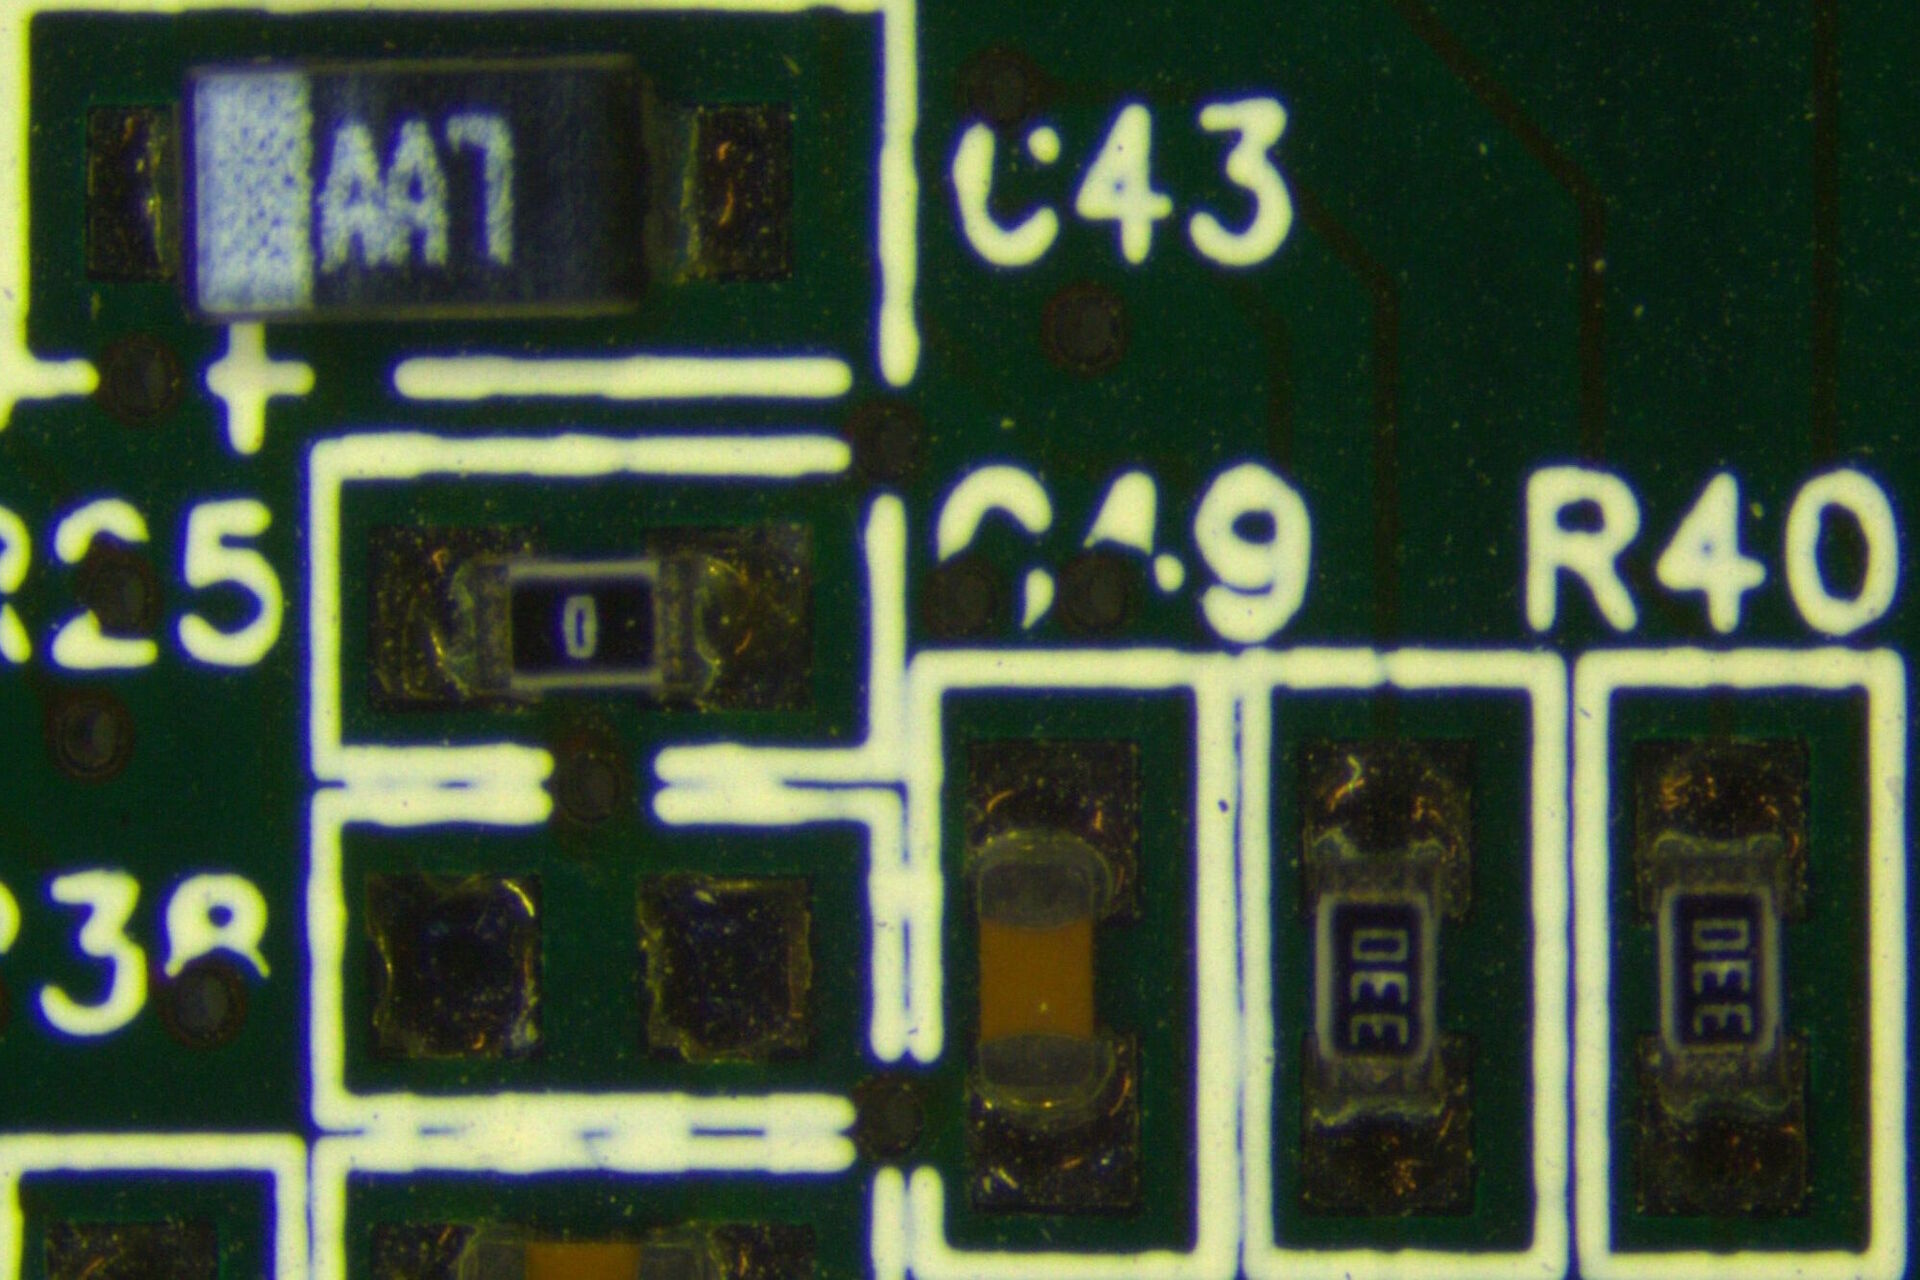 [Translate to chinese:] Printed Circuit Board (PCB) - RL with crossed polarizers: Reflective areas